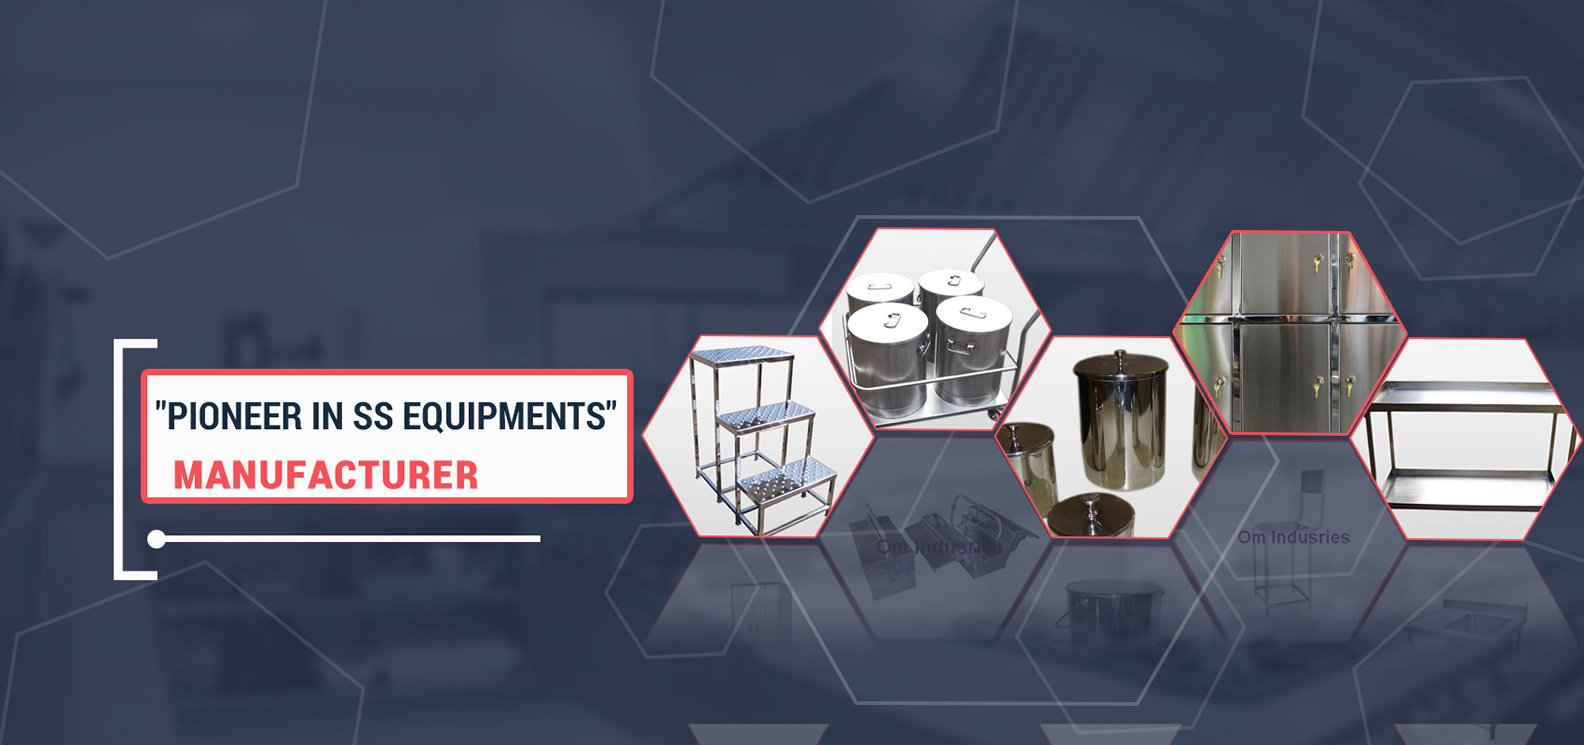 SS Equipments Manufacturer in Taiping

